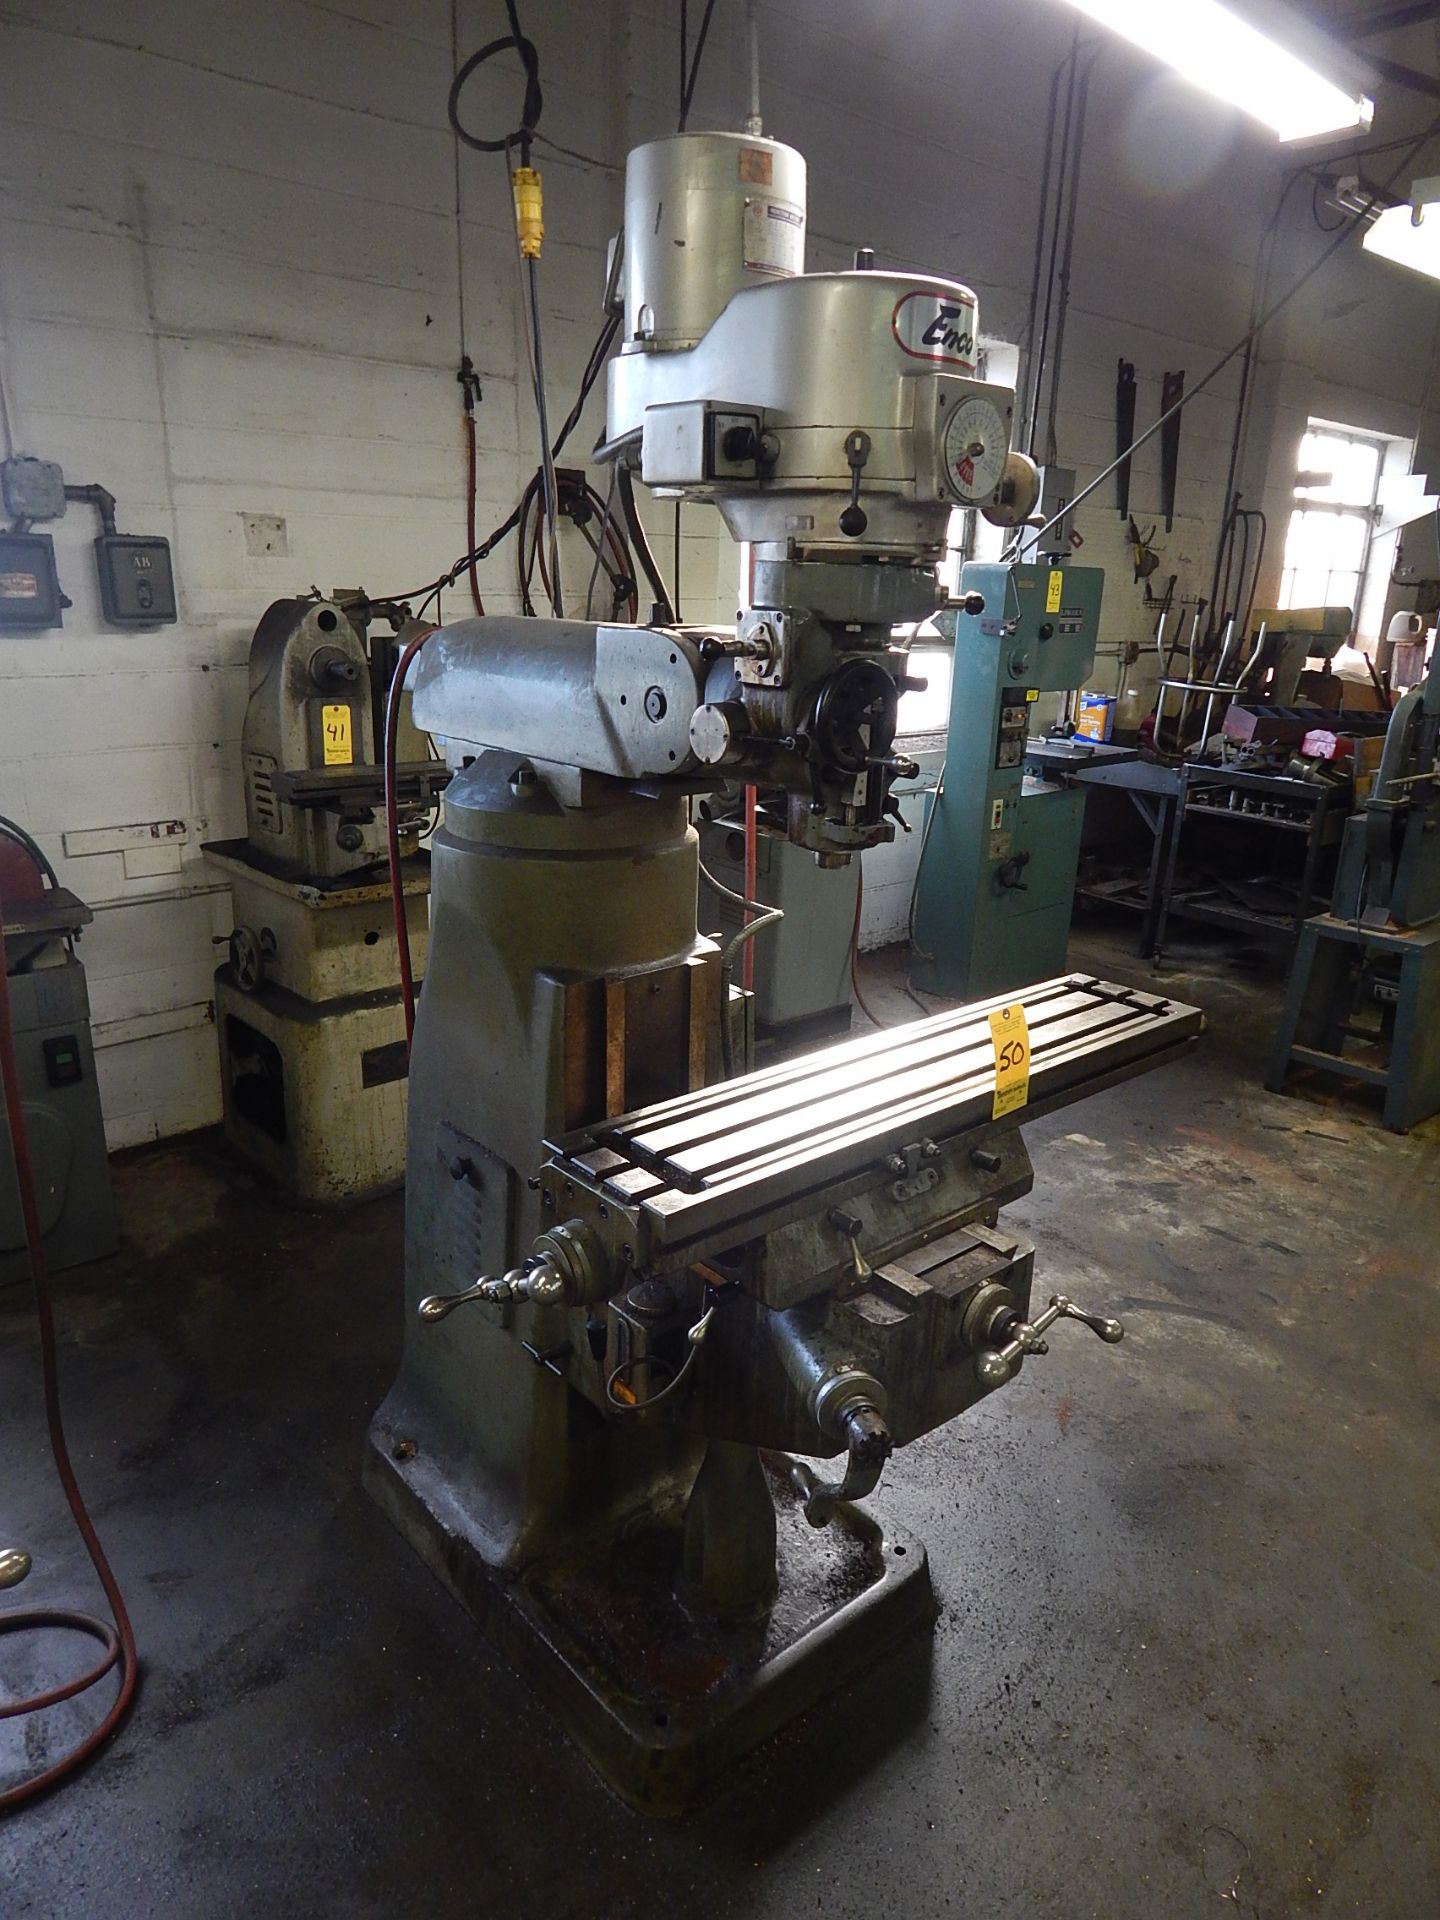 Enco 2 HP Variable Speed Vertical Mill, Model 92066, s/n 748514, 9" X 42" Table, Loading Fee $100.00 - Image 2 of 4